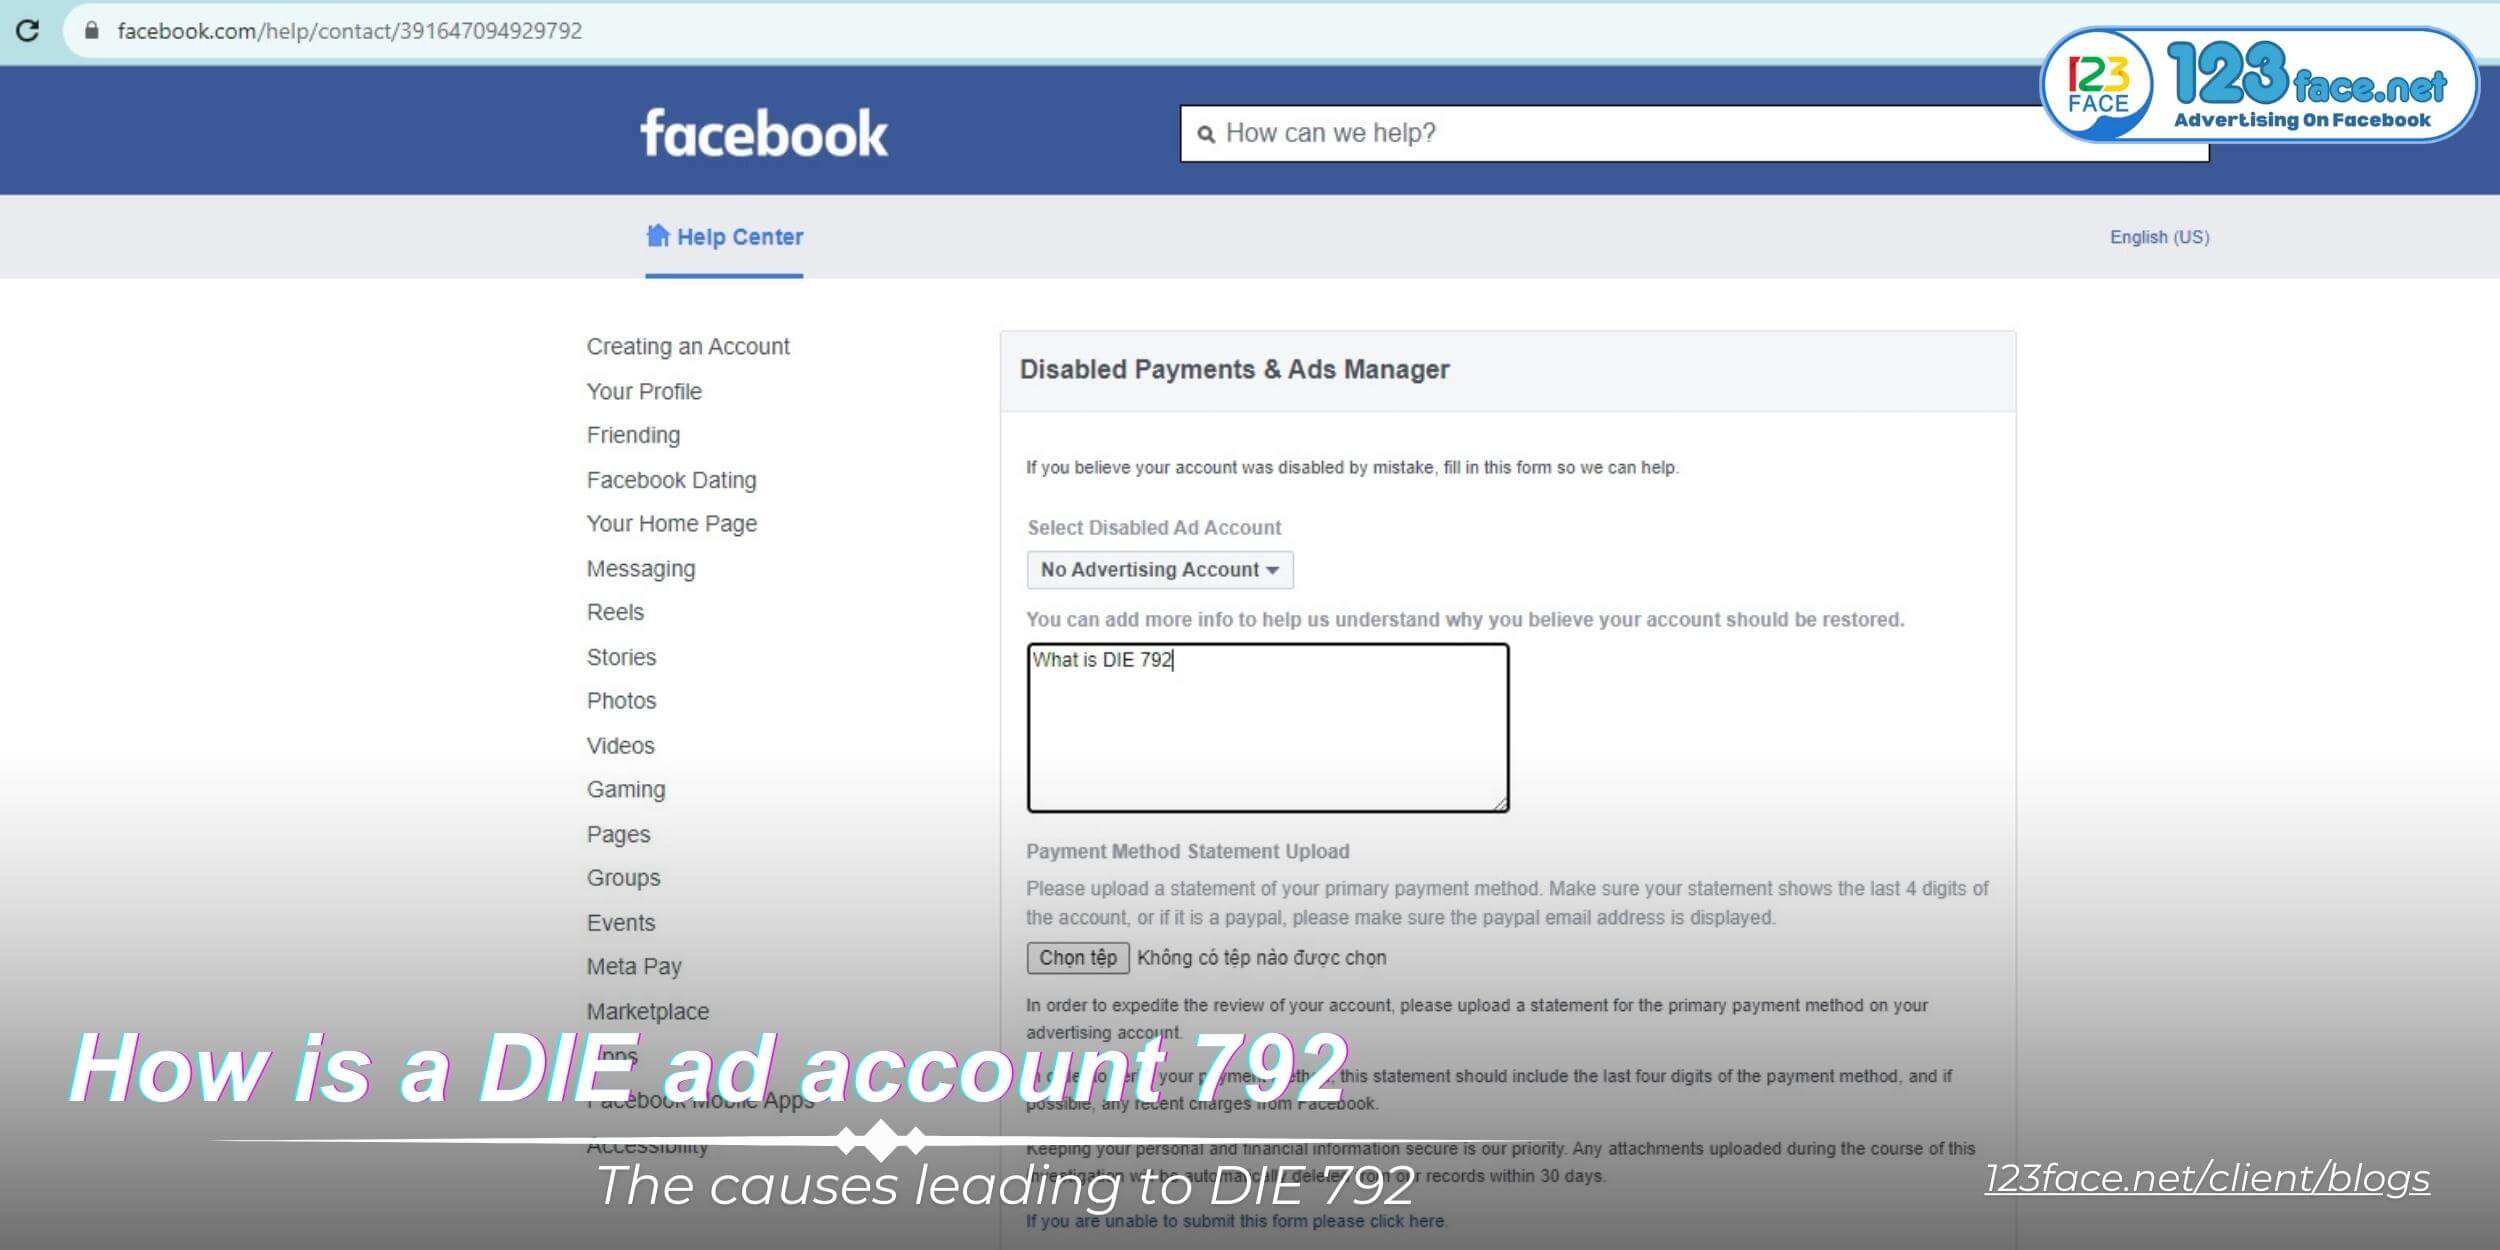 How is a dead ad account 792 (die 792) ?